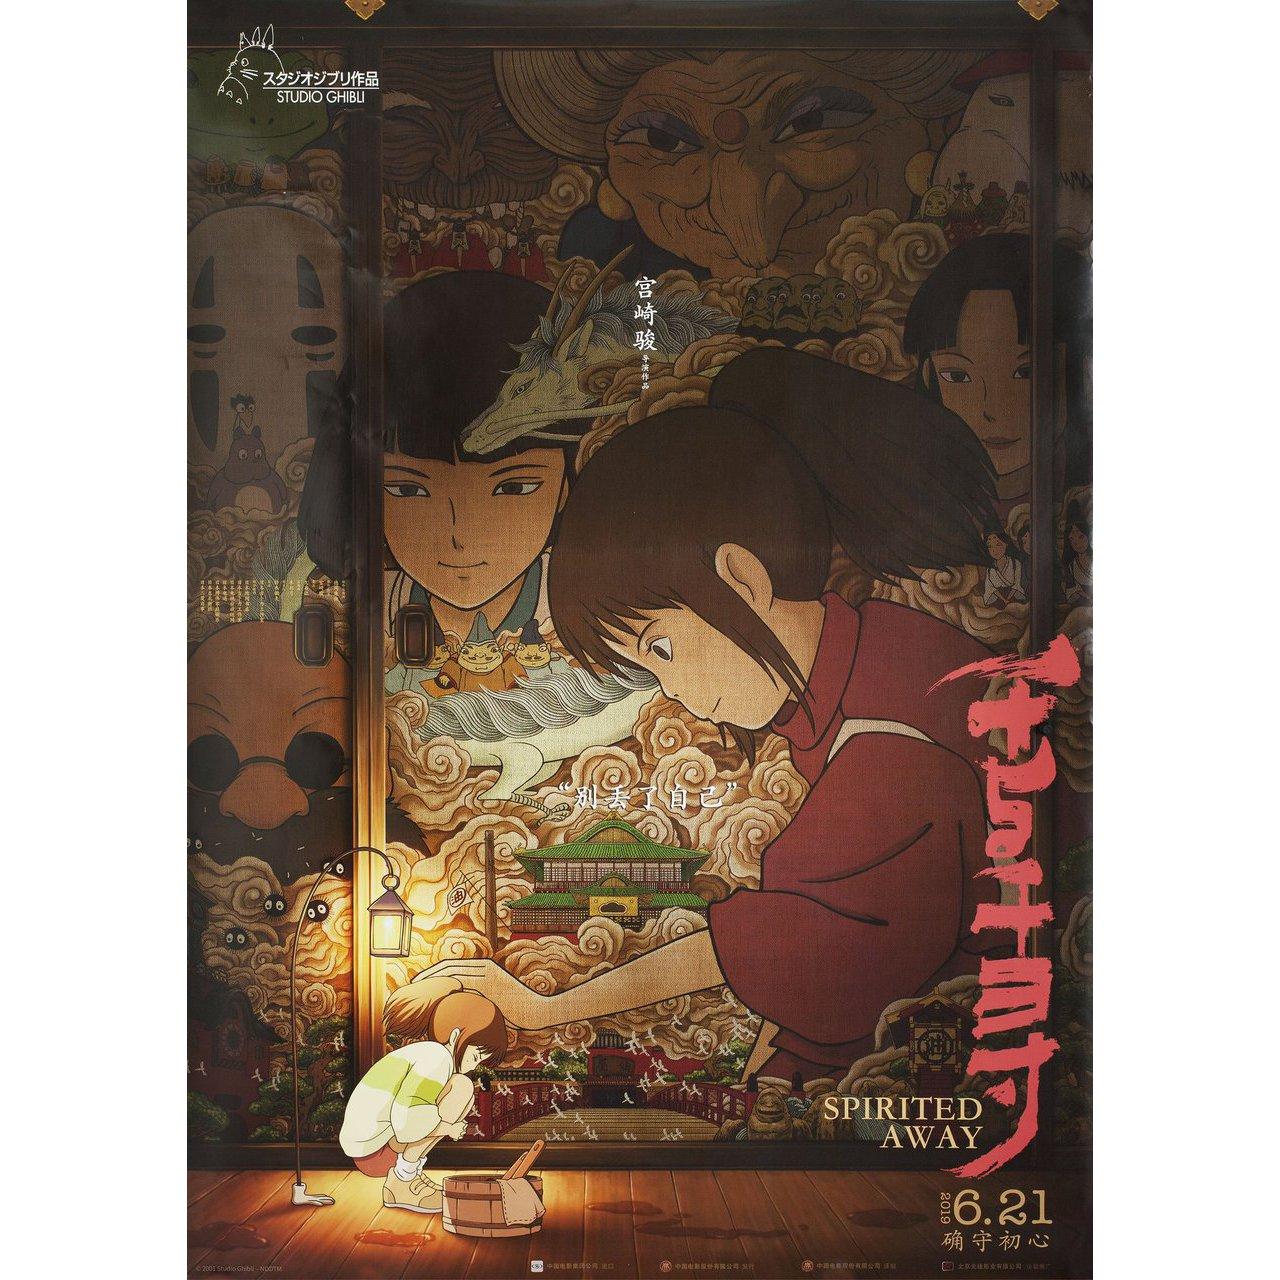 Original 2019 Chinese B1 poster for the first Chinese theatrical release of the 2001 film Spirited Away (Sen to Chihiro no kamikakushi) directed by Hayao Miyazaki with Daveigh Chase / Suzanne Pleshette / Susan Egan / David Ogden Stiers. Very